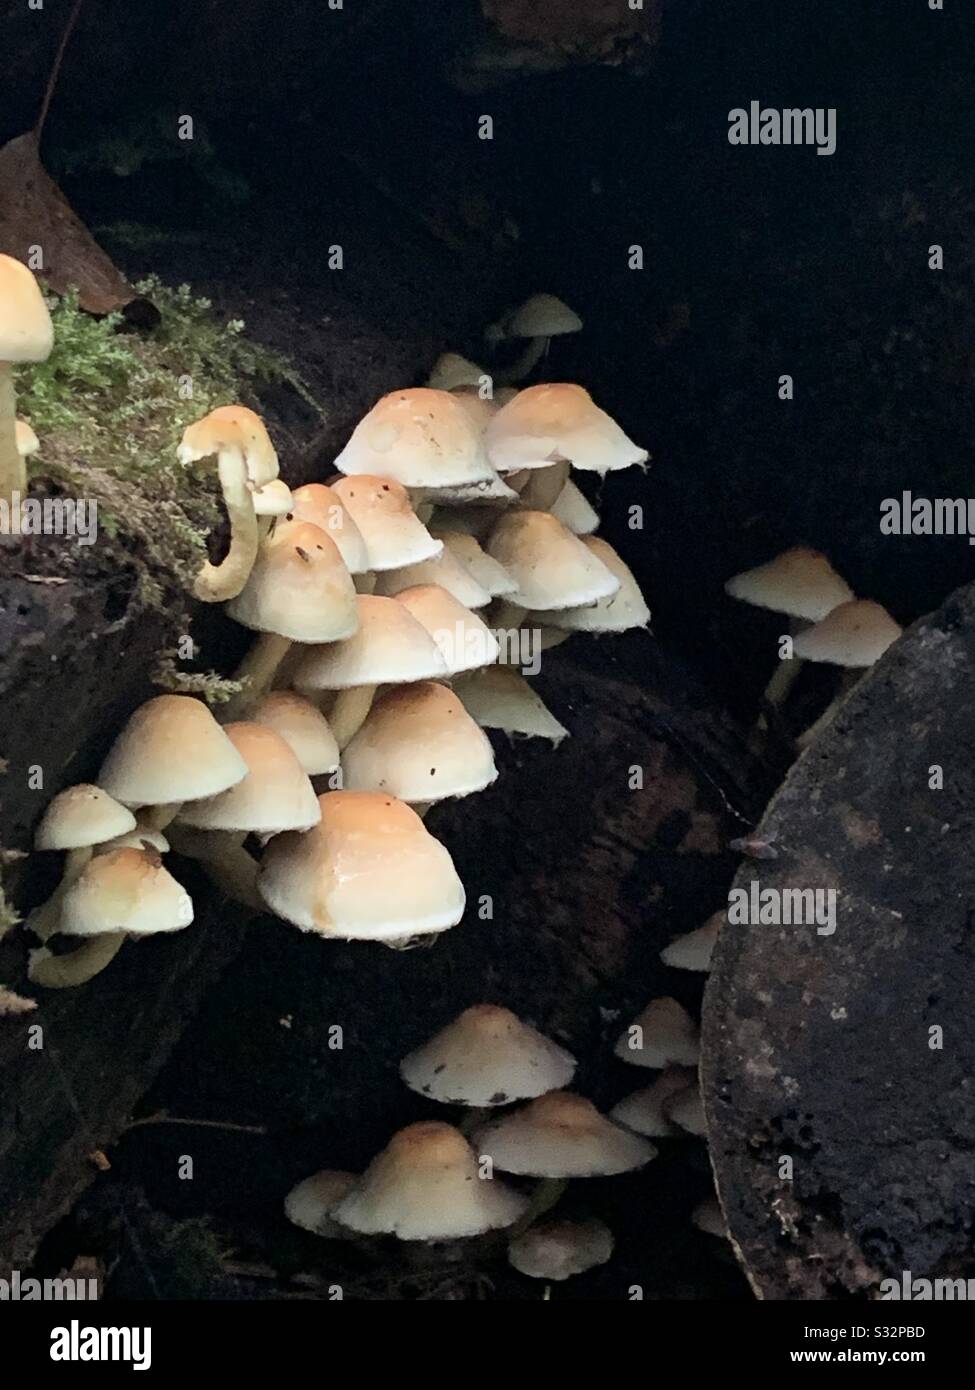 Wild mushrooms growing in an ancient forest Stock Photo